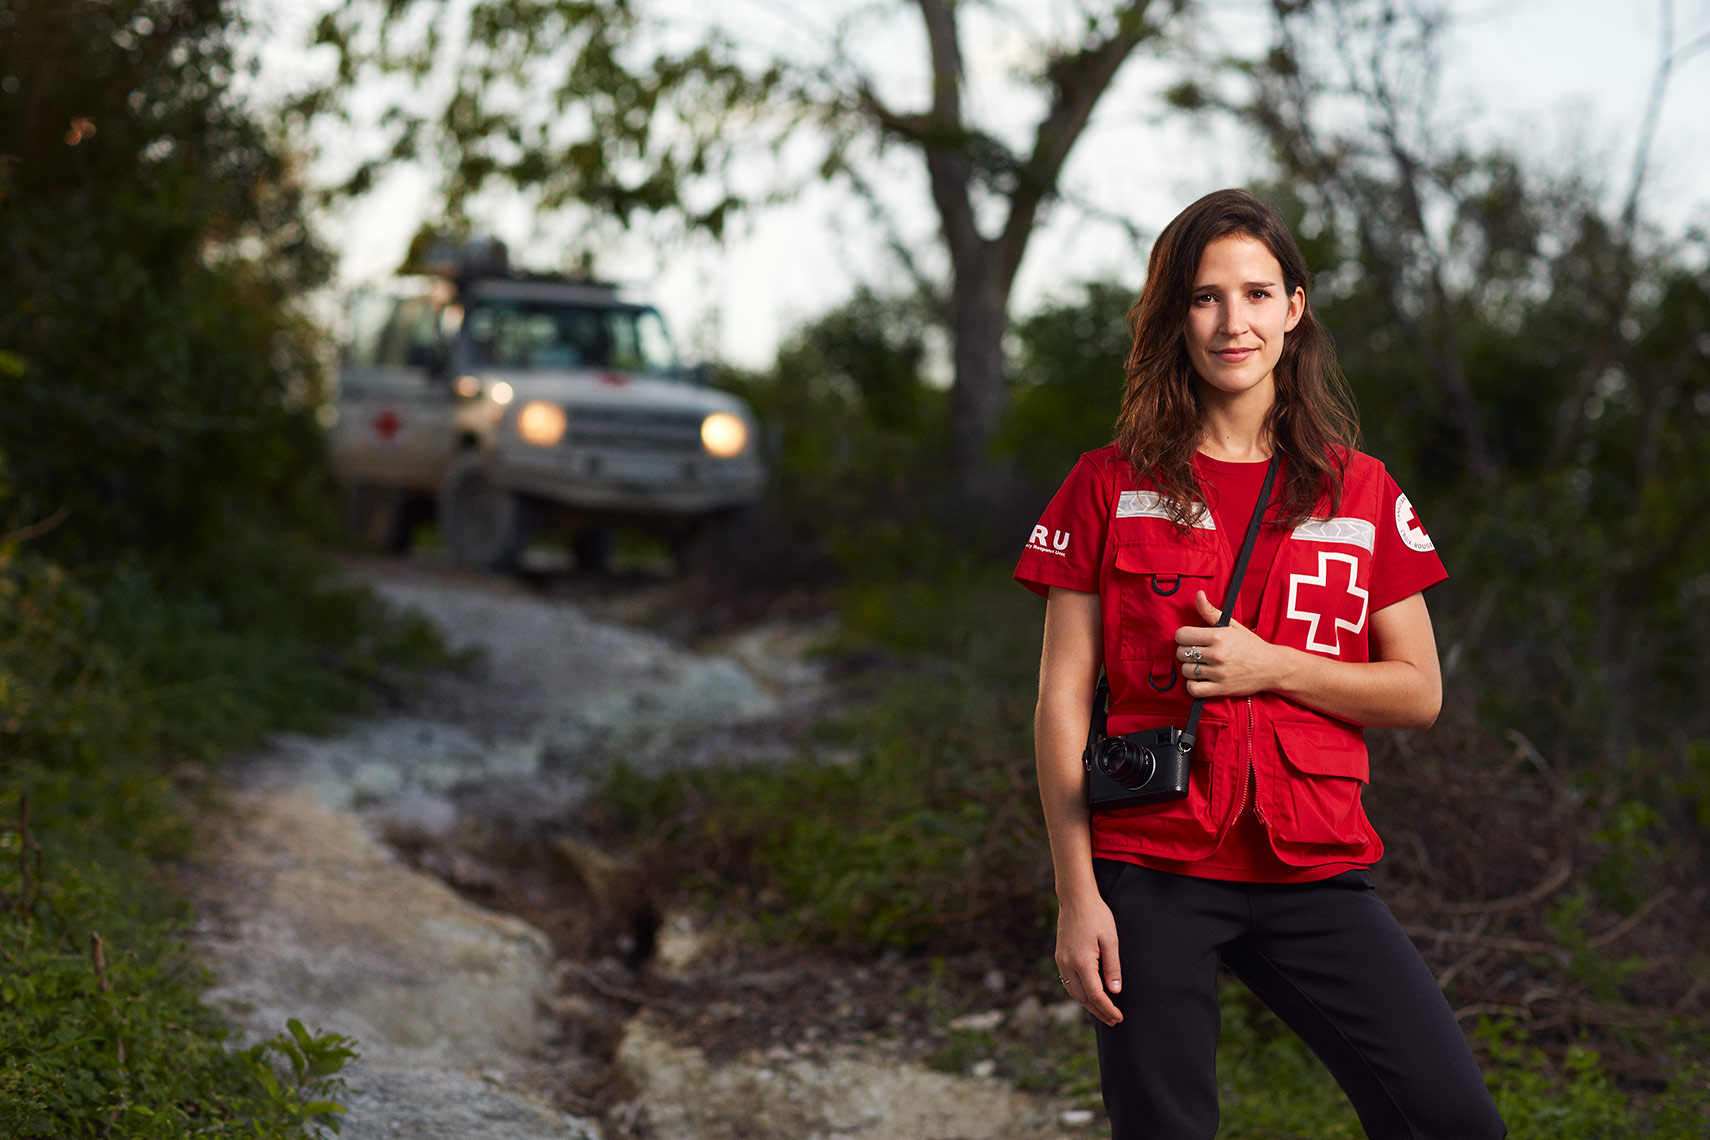 Faces of Humanity, Stephanie Picard in Haiti for Canadian Red Cross